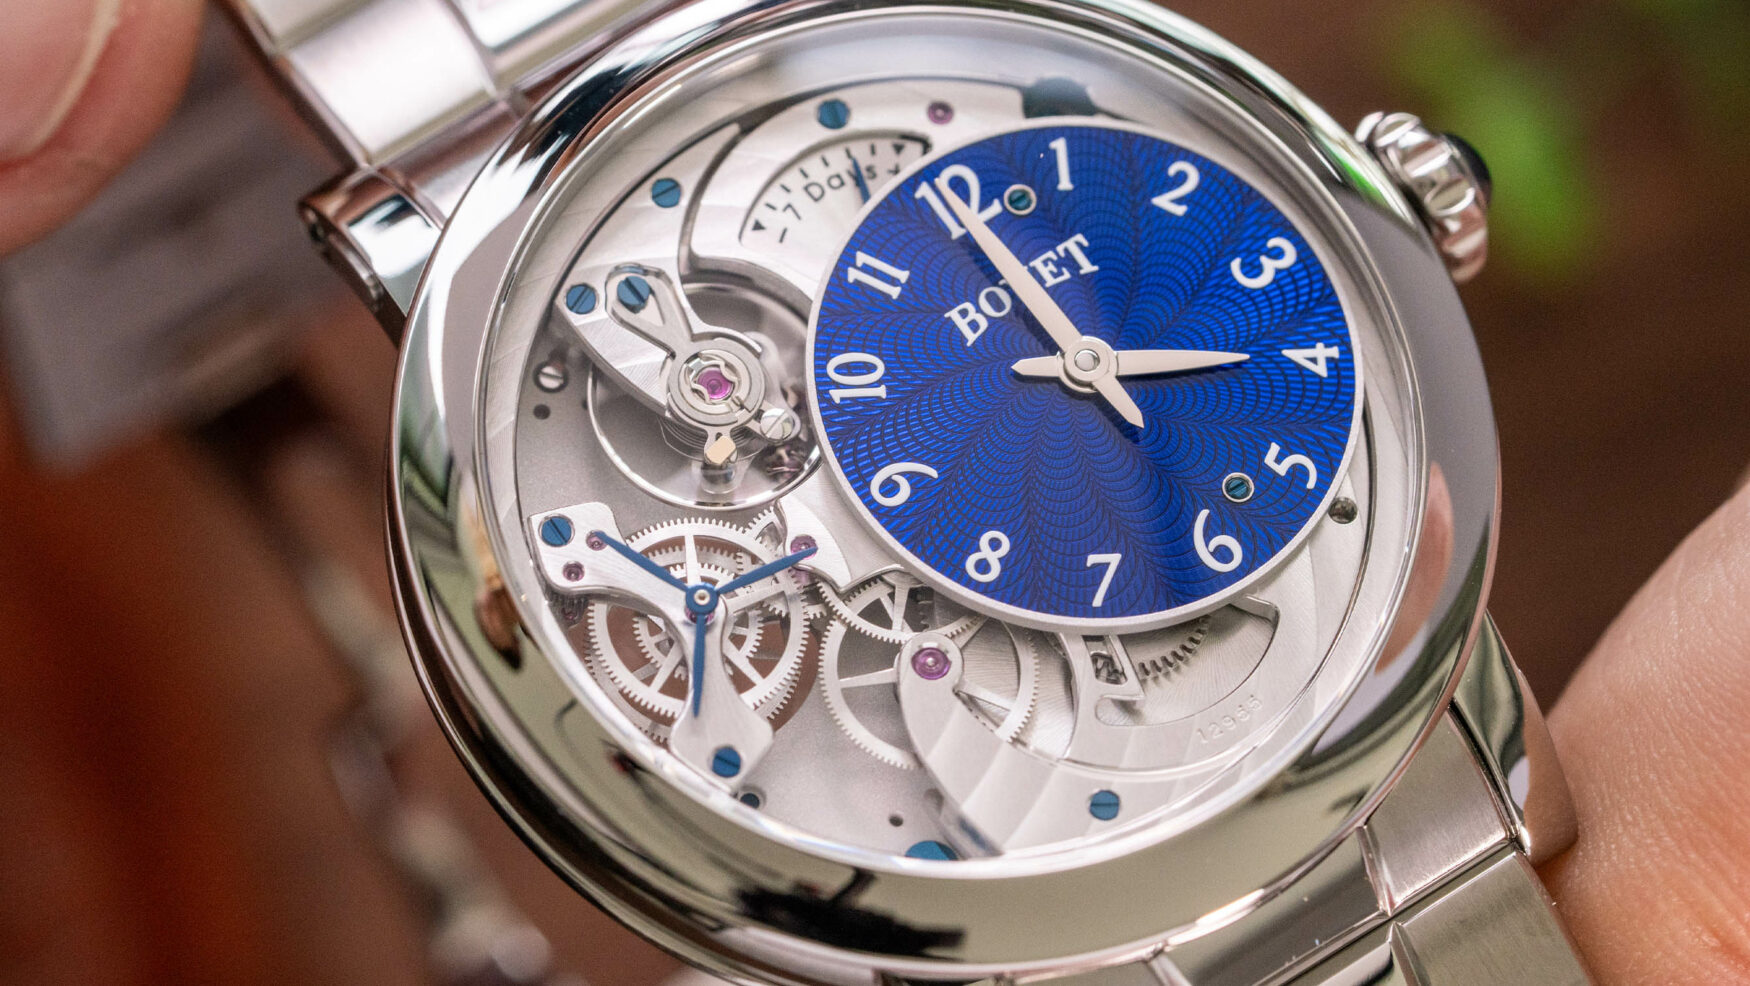 Bovet’s first bracelet turns the Récital 12 into a high-luxury daily driver